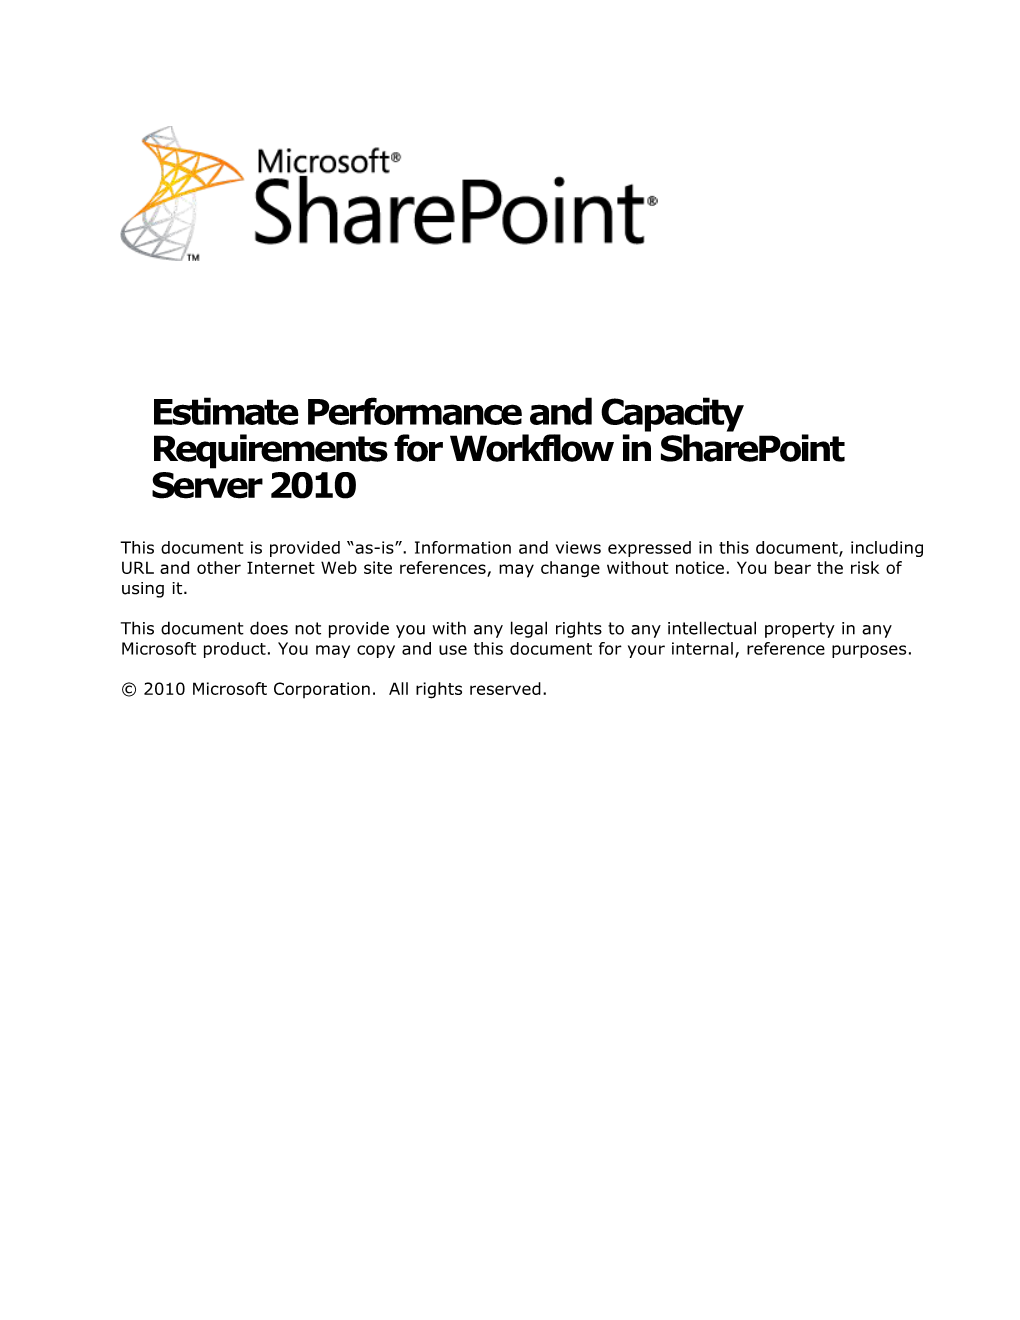 Estimate Performance and Capacity Requirements for Workflow in Sharepoint Server 2010